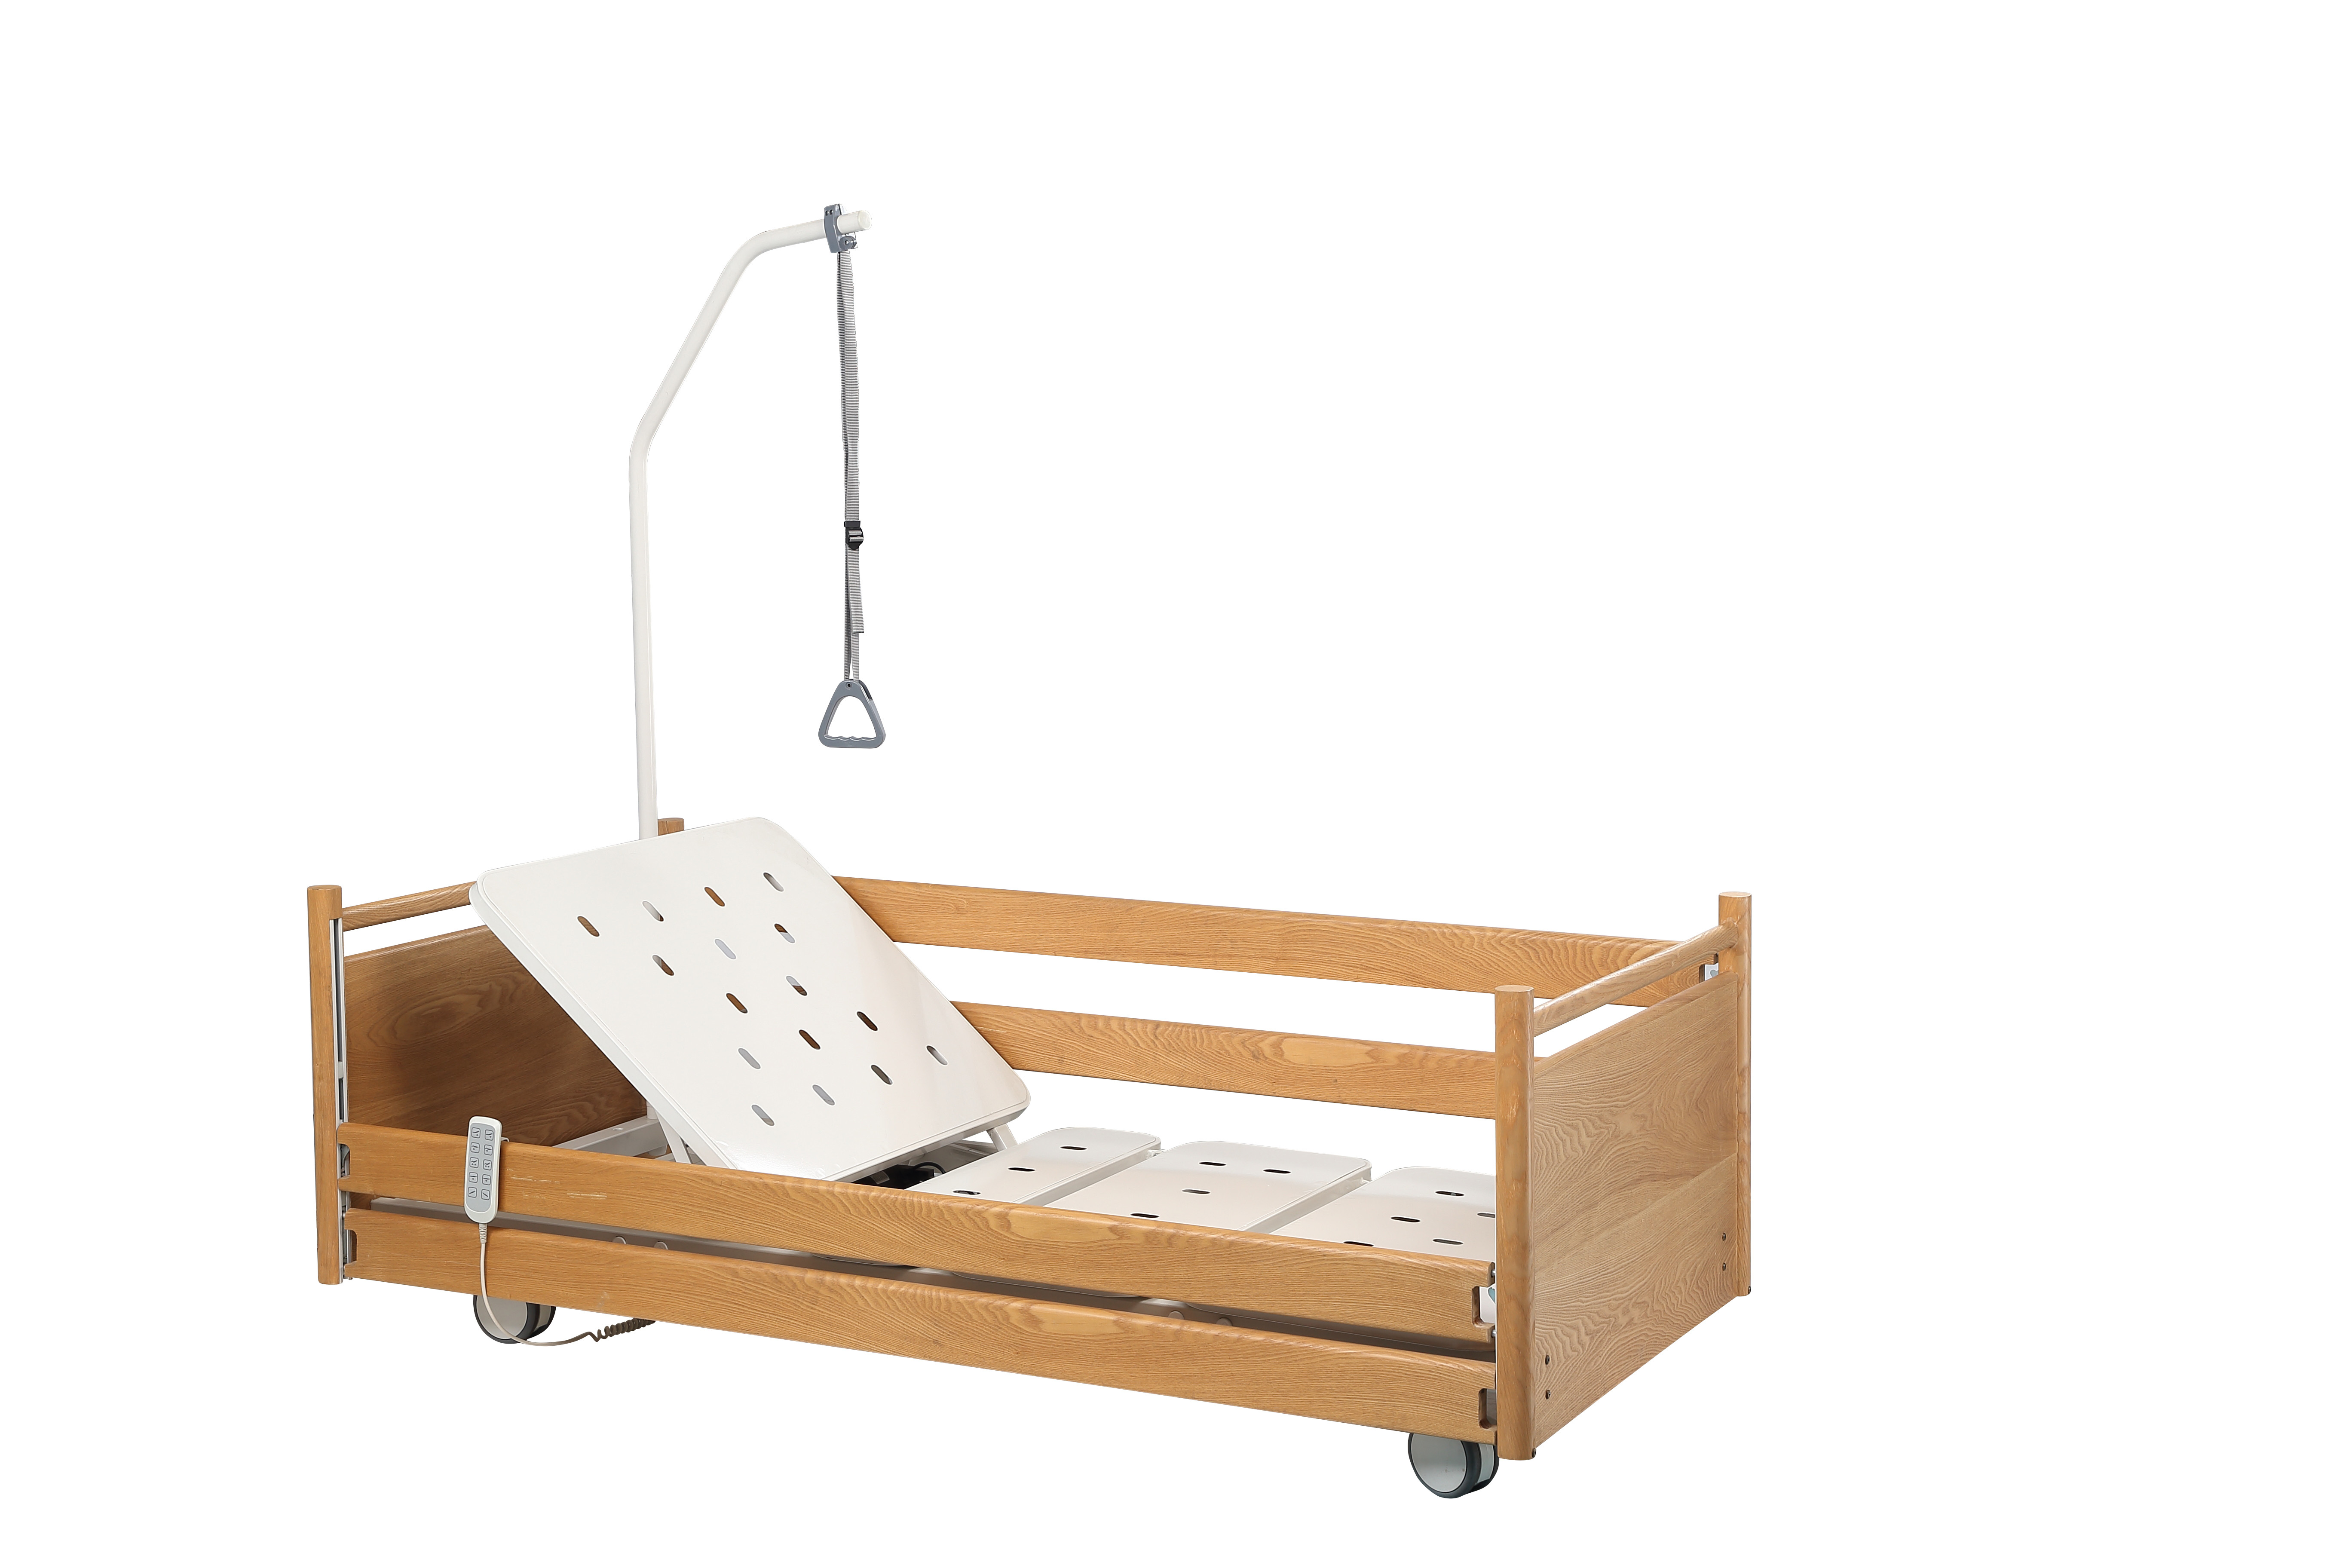 Quality 2190 * 970 * 300 - 760mm Home Care Bed For Paralysis Patient Wooden Handrails for sale